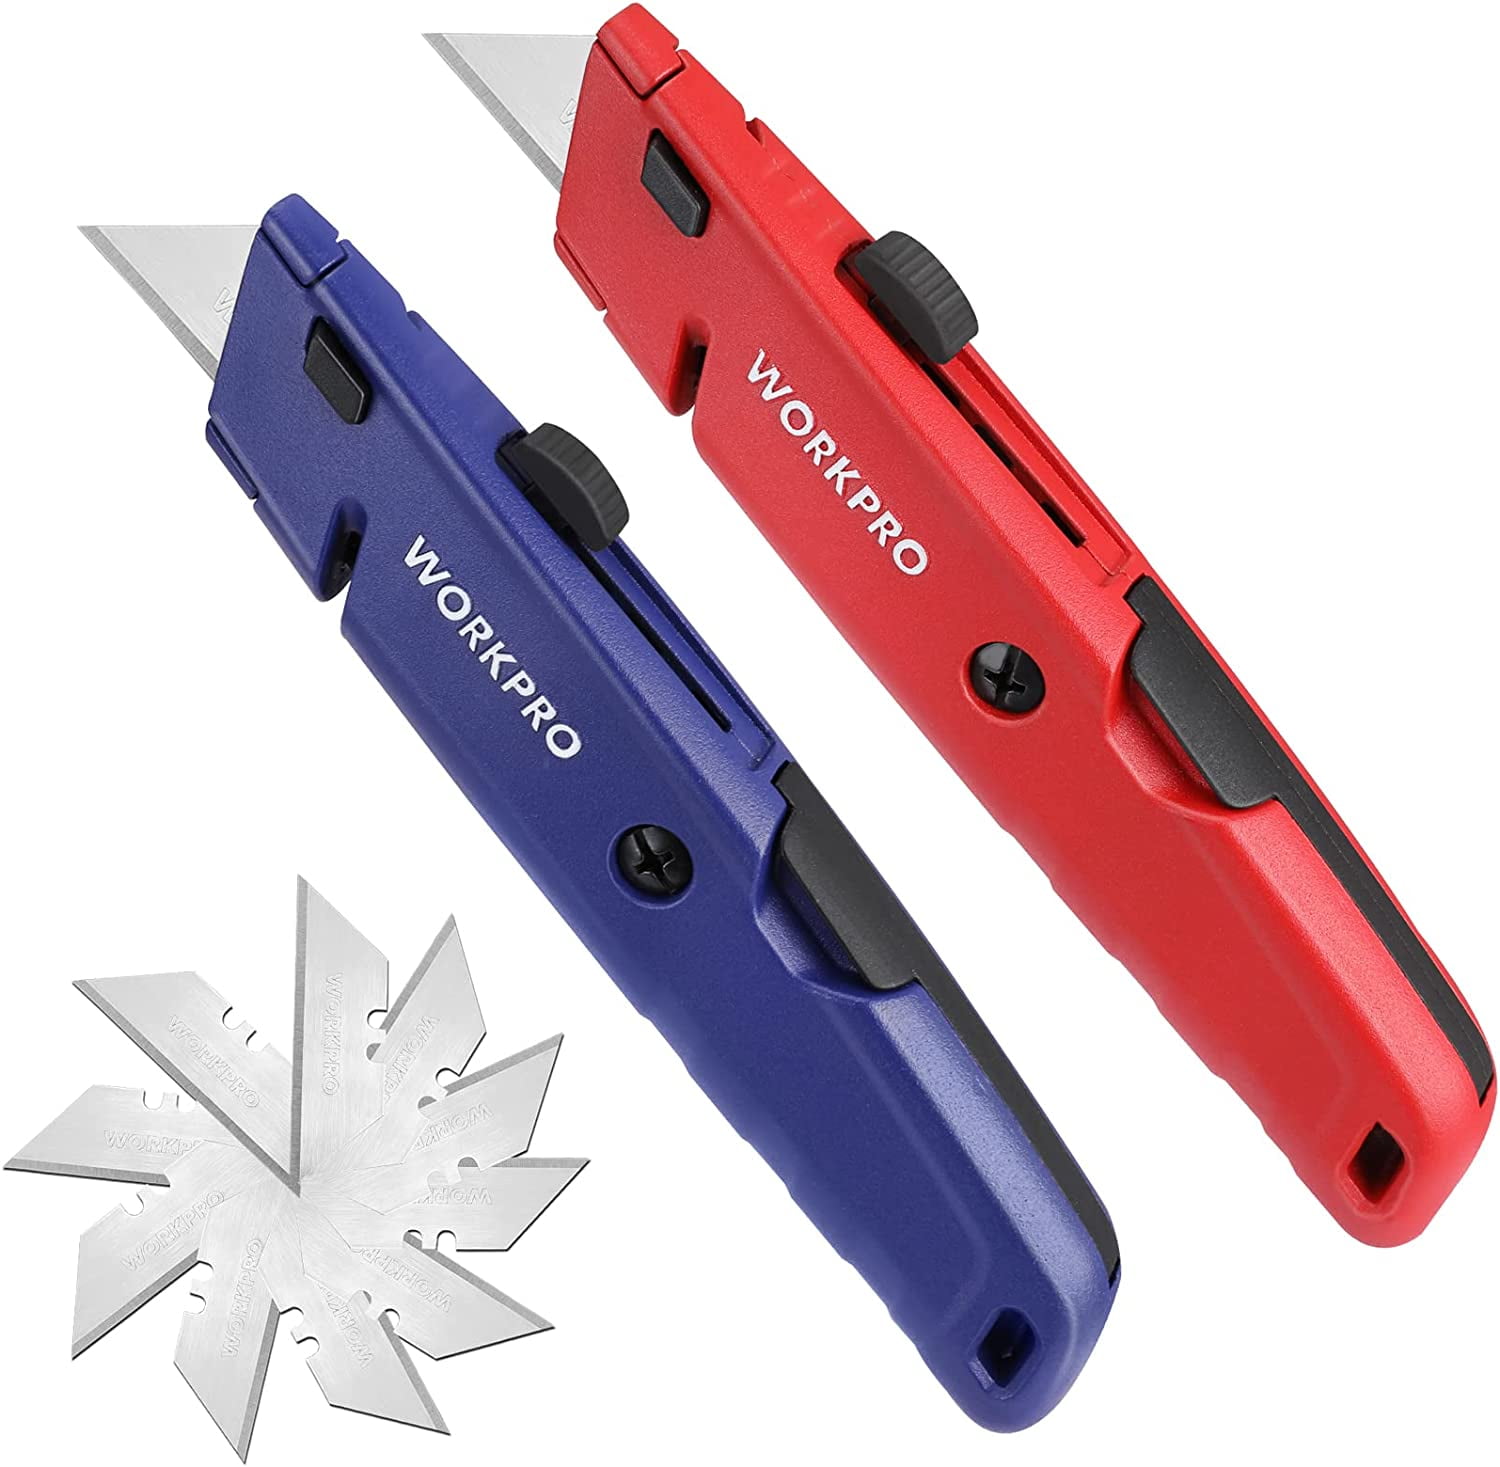 Hangzhou Great Star Industrial WORKPRO EDC Folding Utility Knife, Mini Box  Cutter with Quick Open Axis